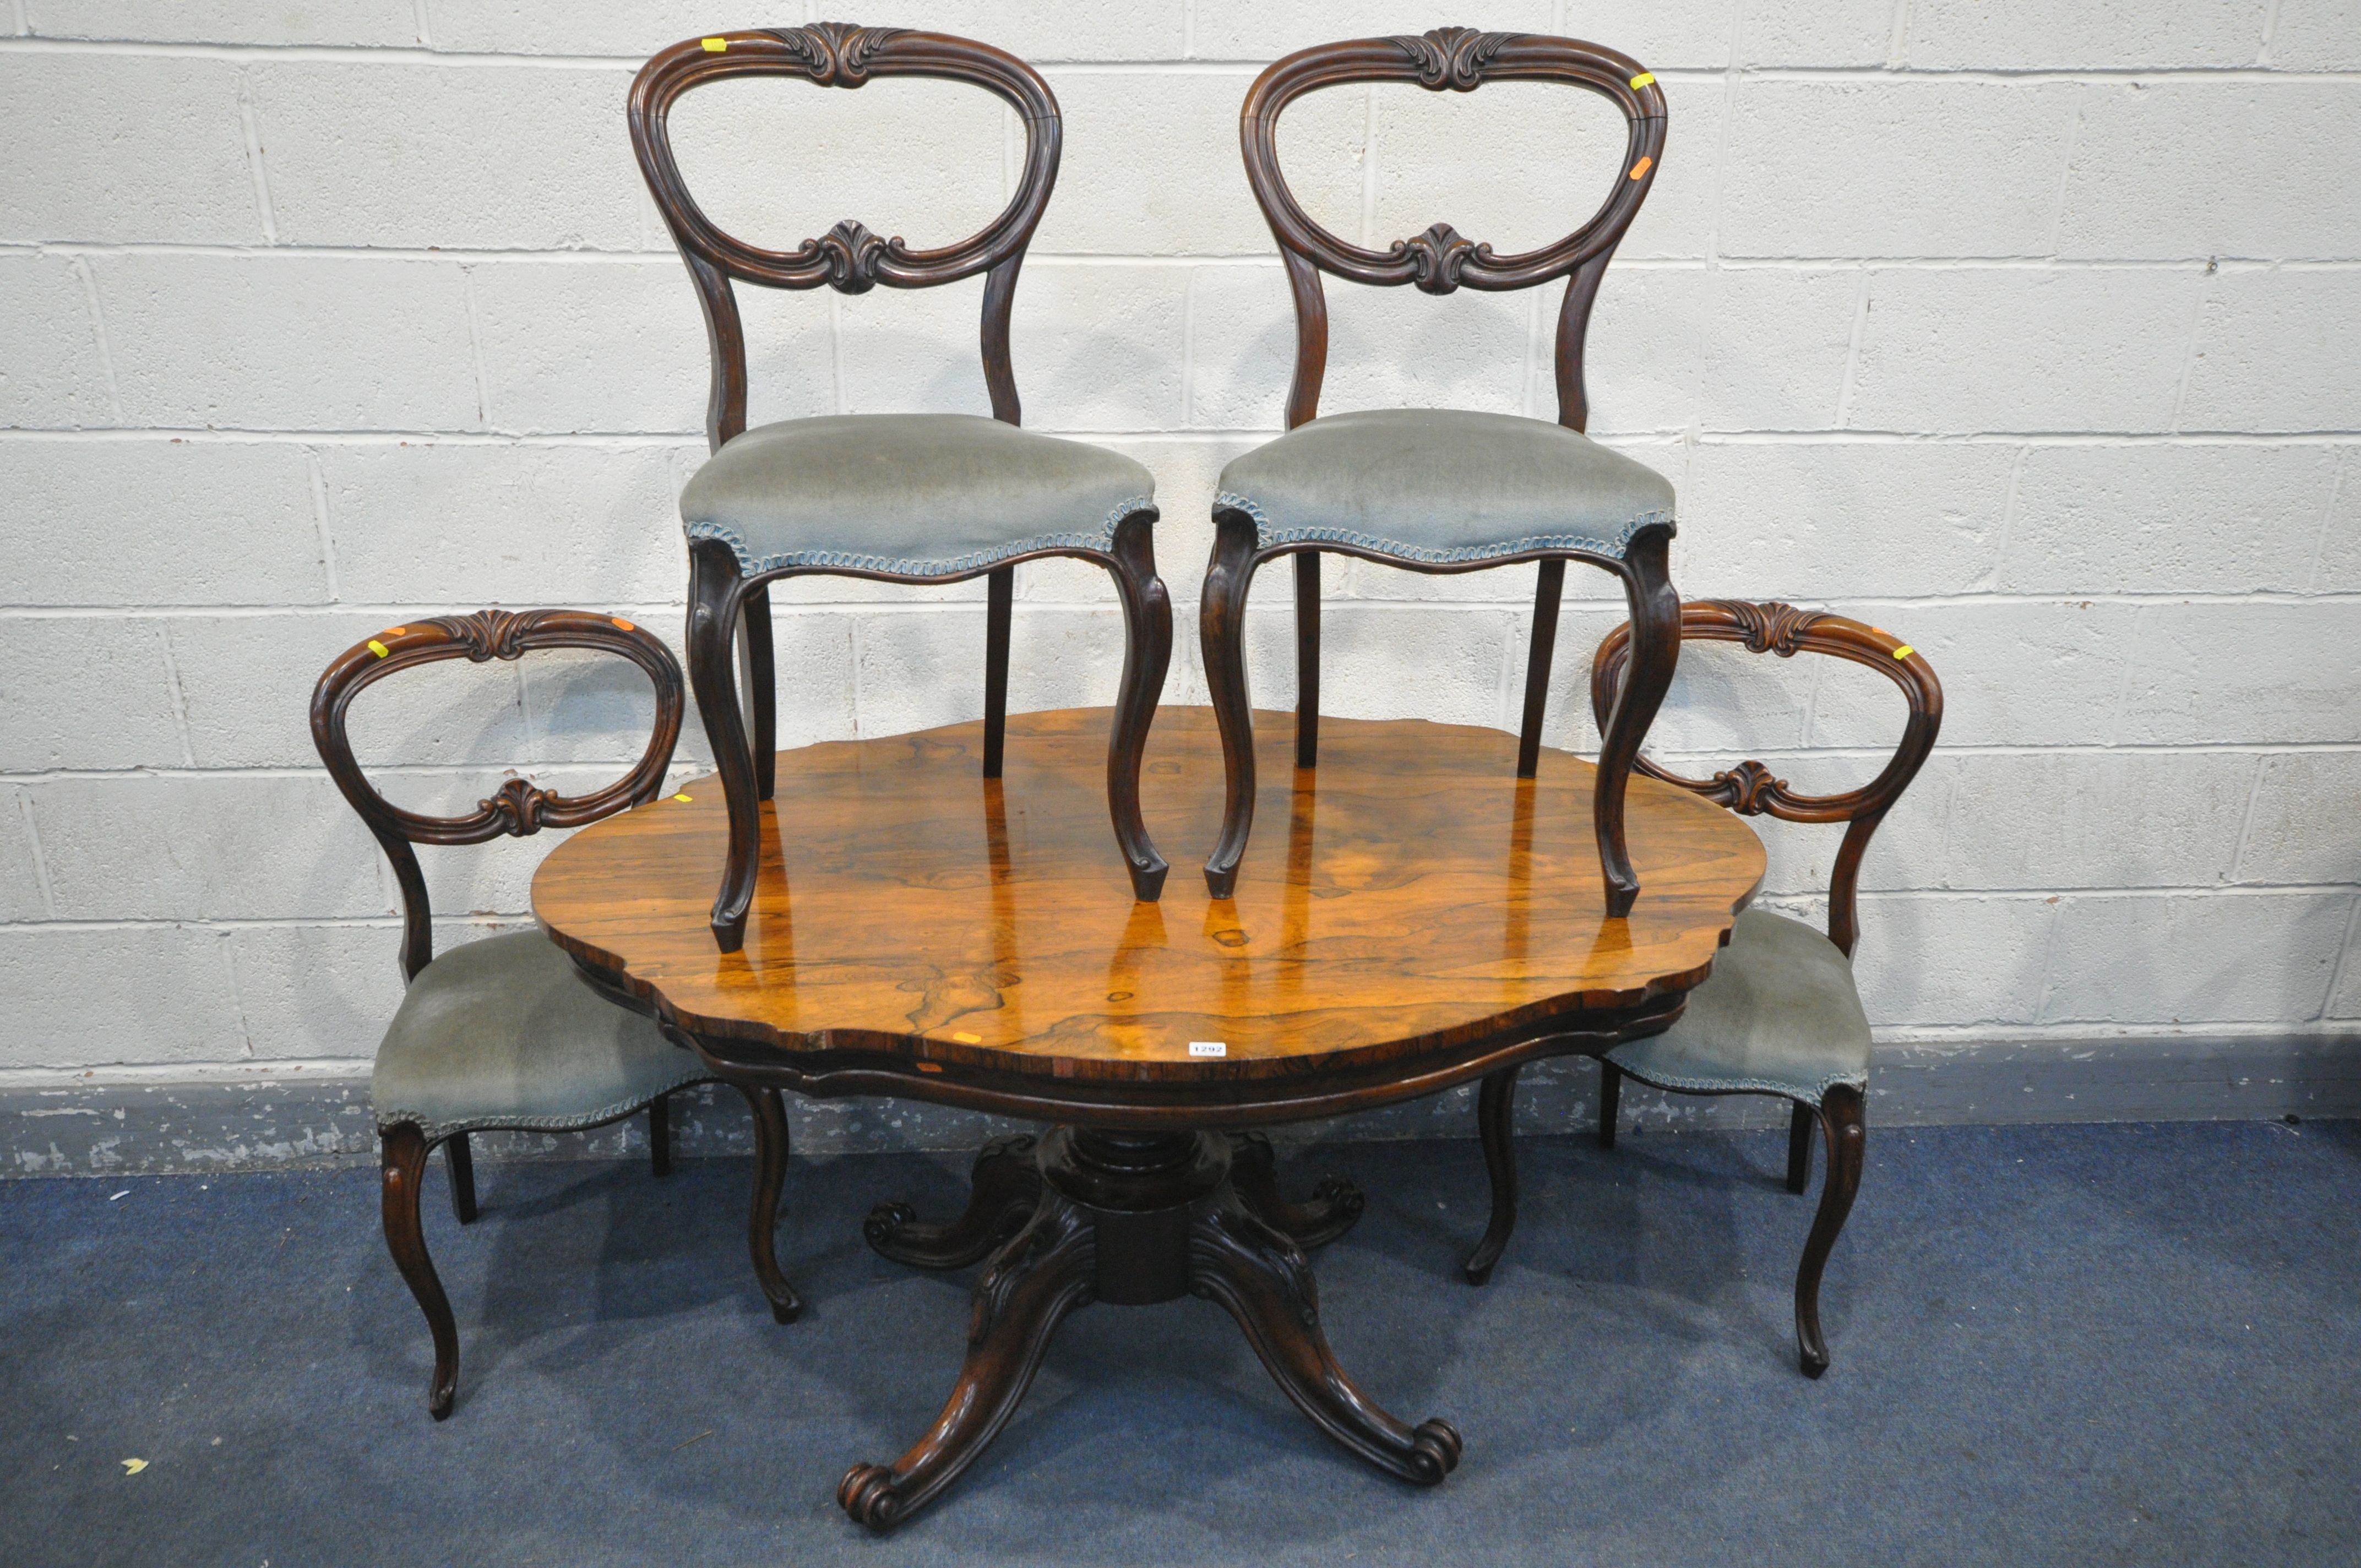 A VICTORIAN ROSEWOOD BREAKFAST TABLE, with a wavy top, on four scrolled legs and casters, length